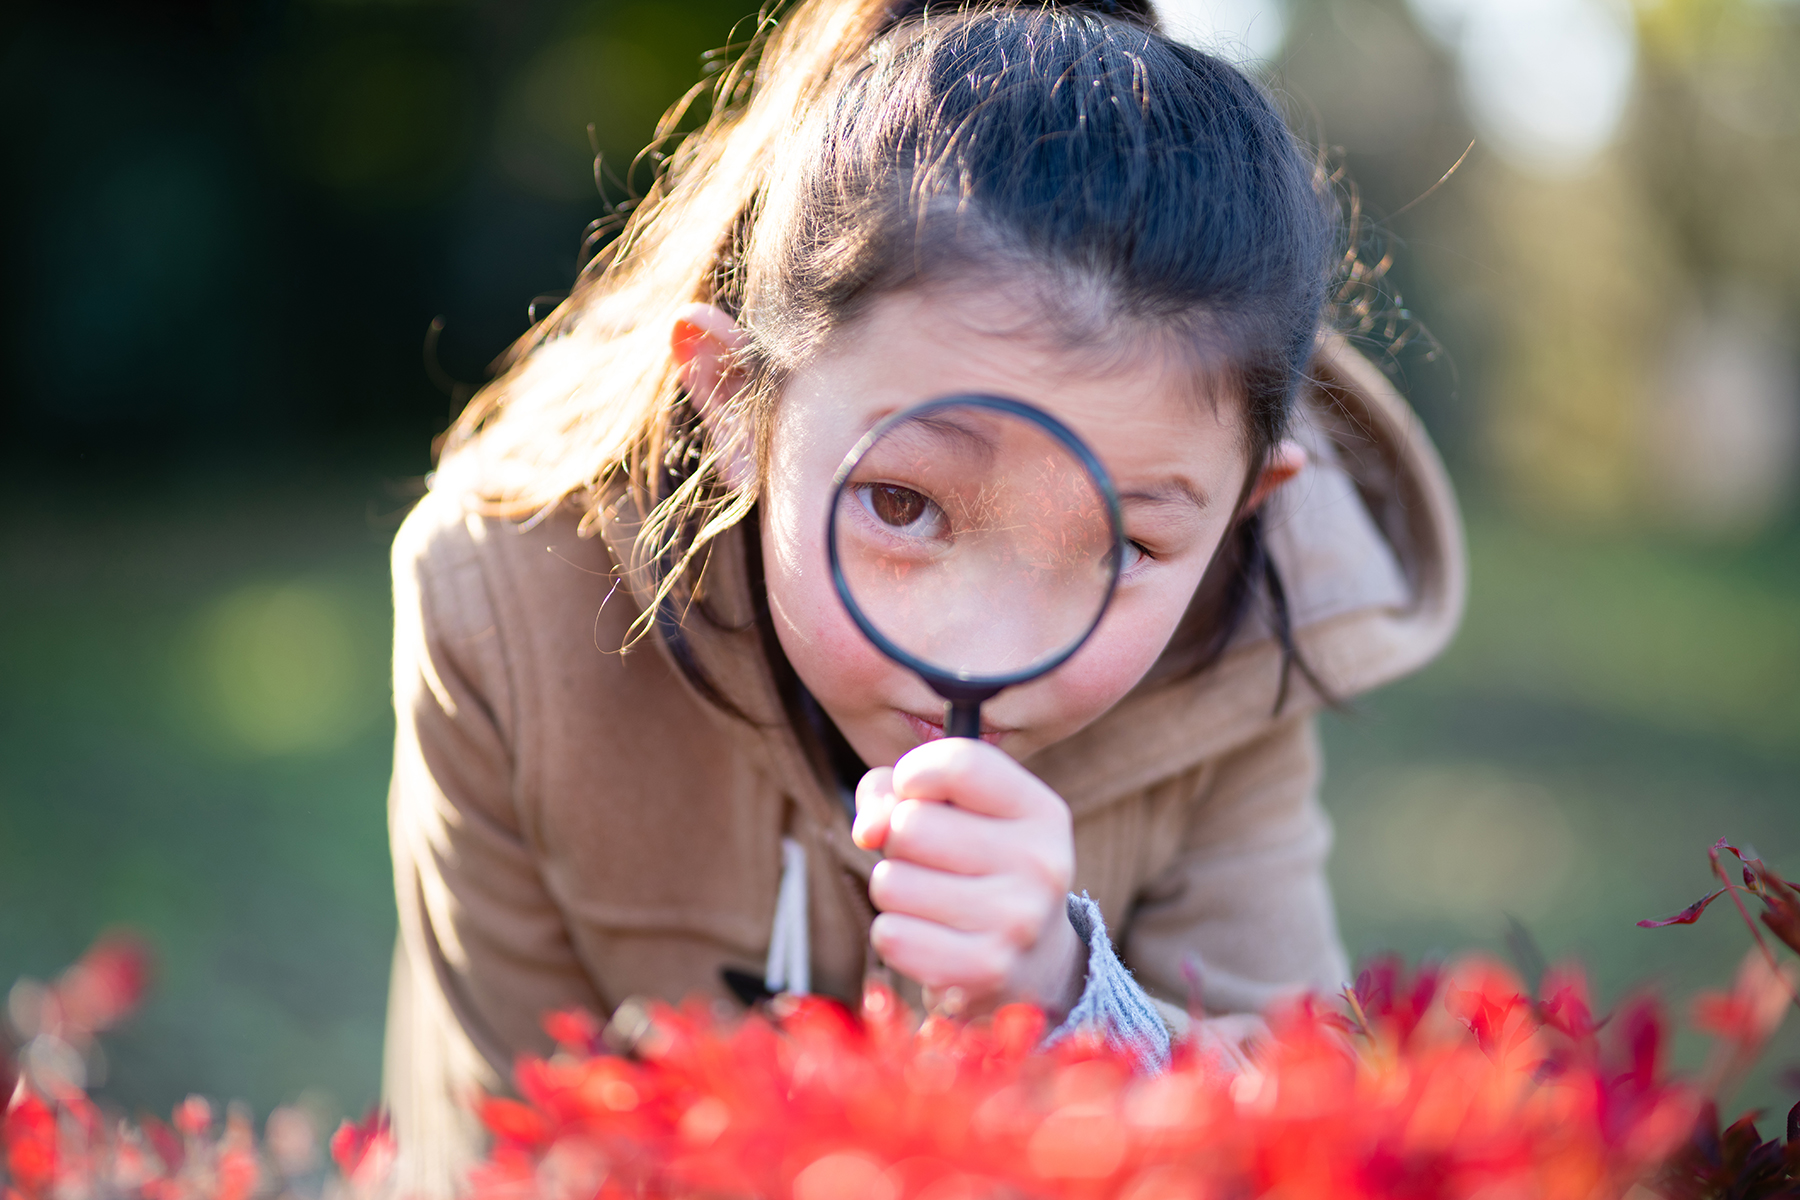 A photo of a young girl looking for clues using a magnifying glass - she is almost looking straight into the camera